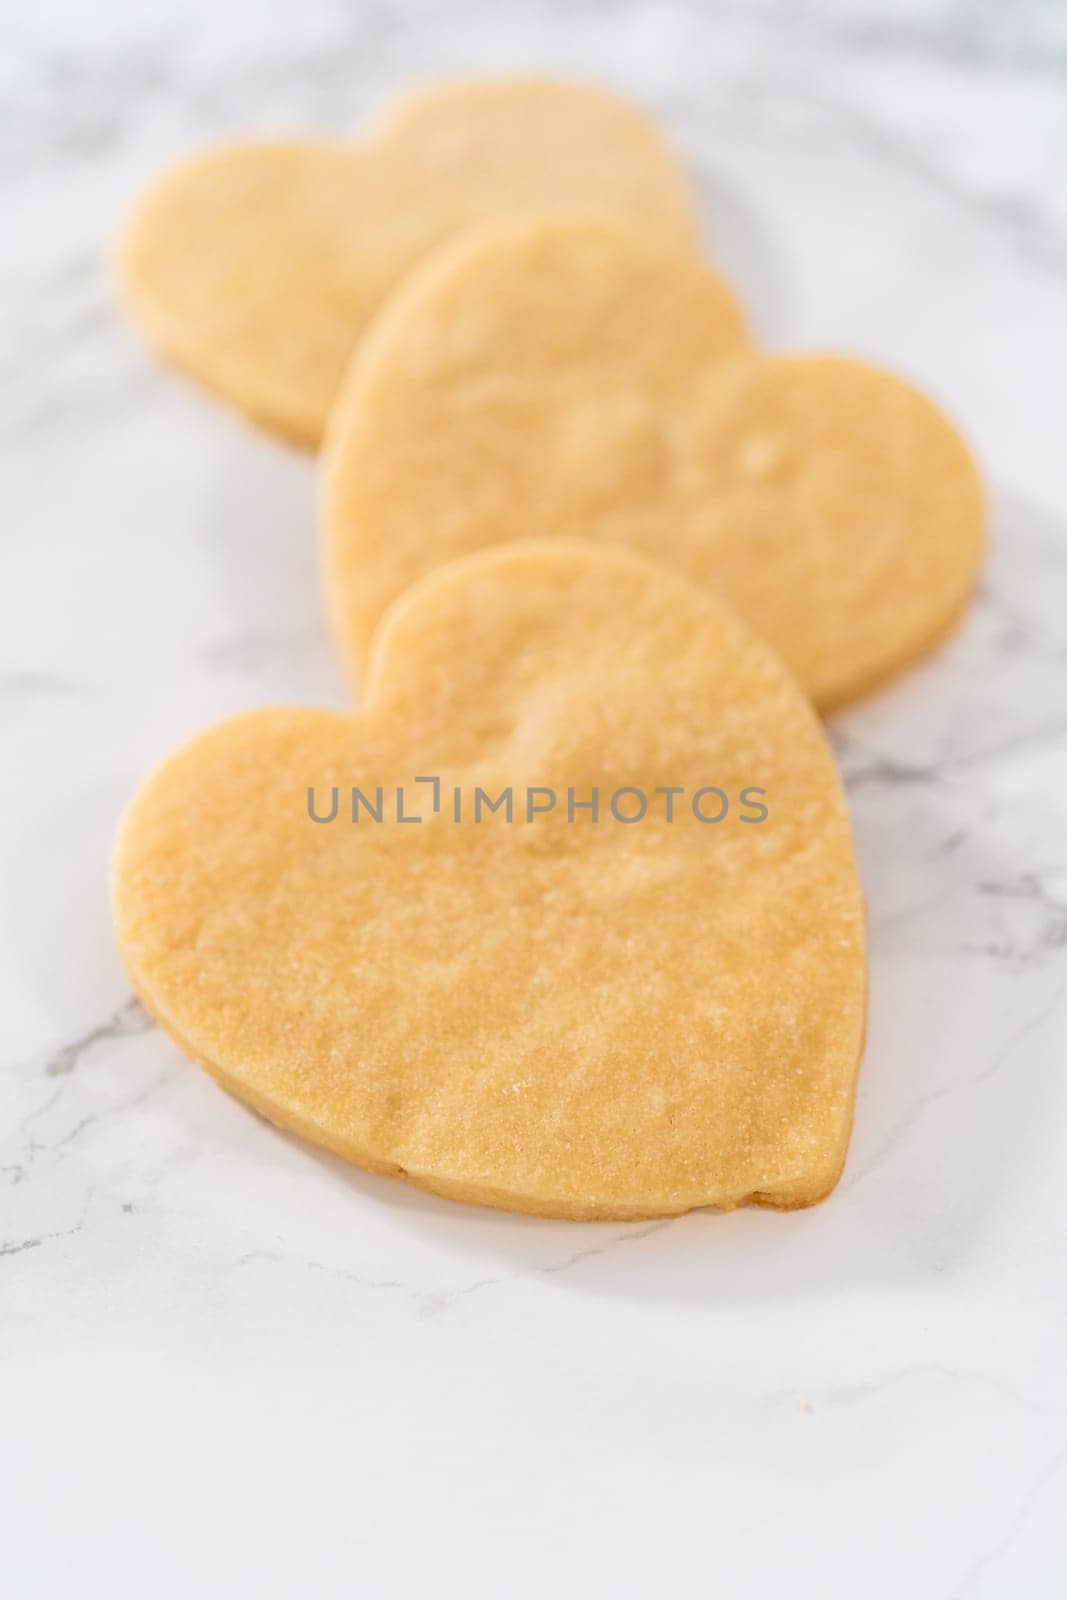 Heart-shaped sugar cookies with royal icing by arinahabich